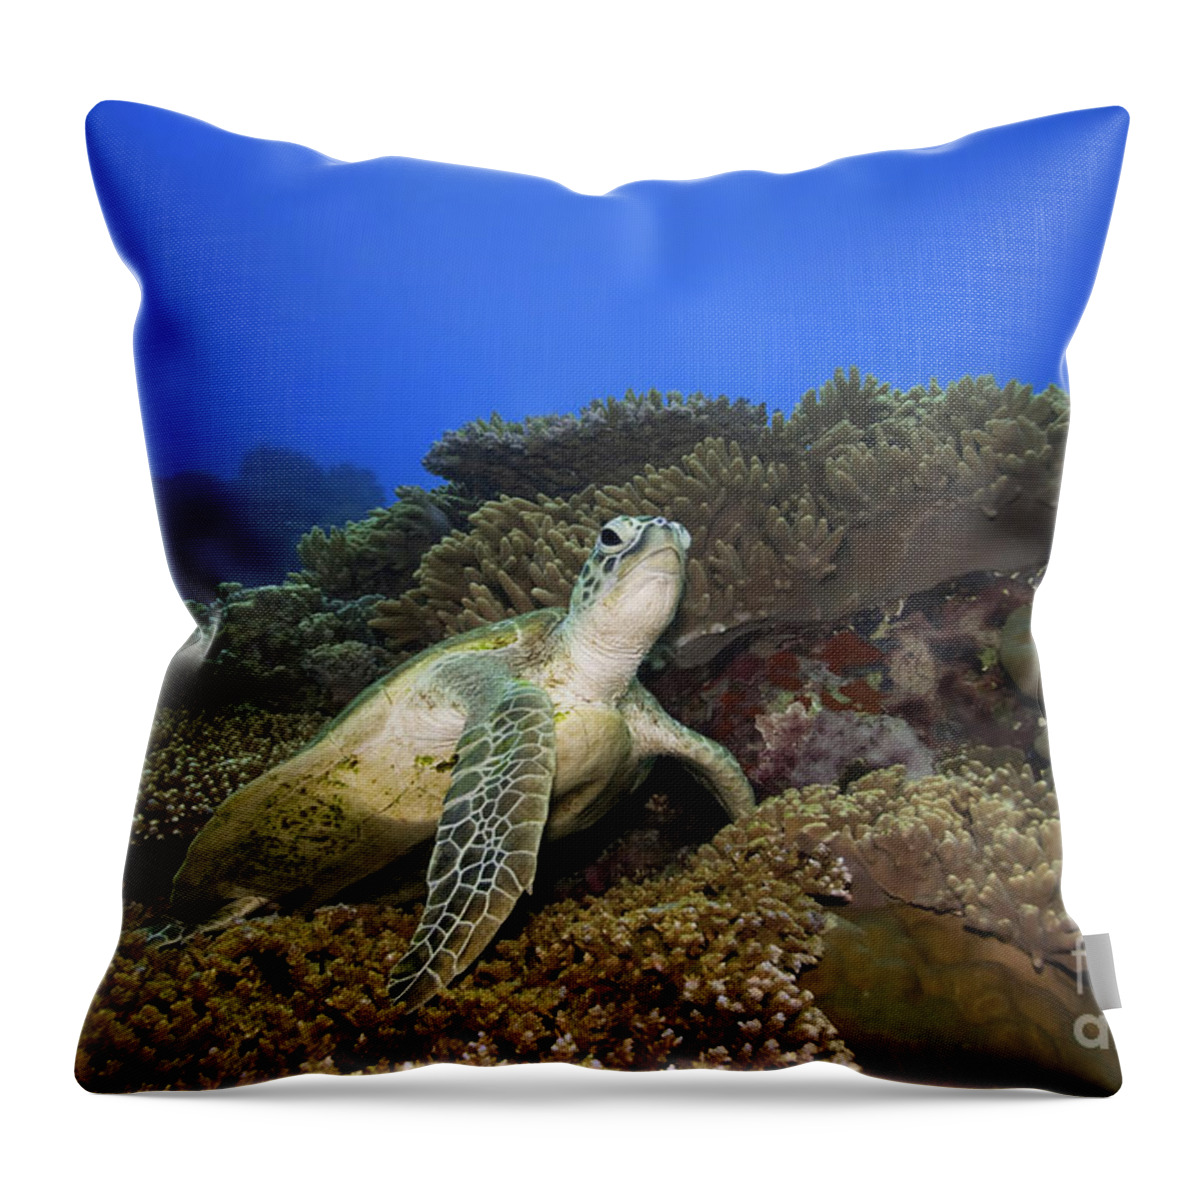 Turtle Throw Pillow featuring the photograph Turtle underwater by MotHaiBaPhoto Prints